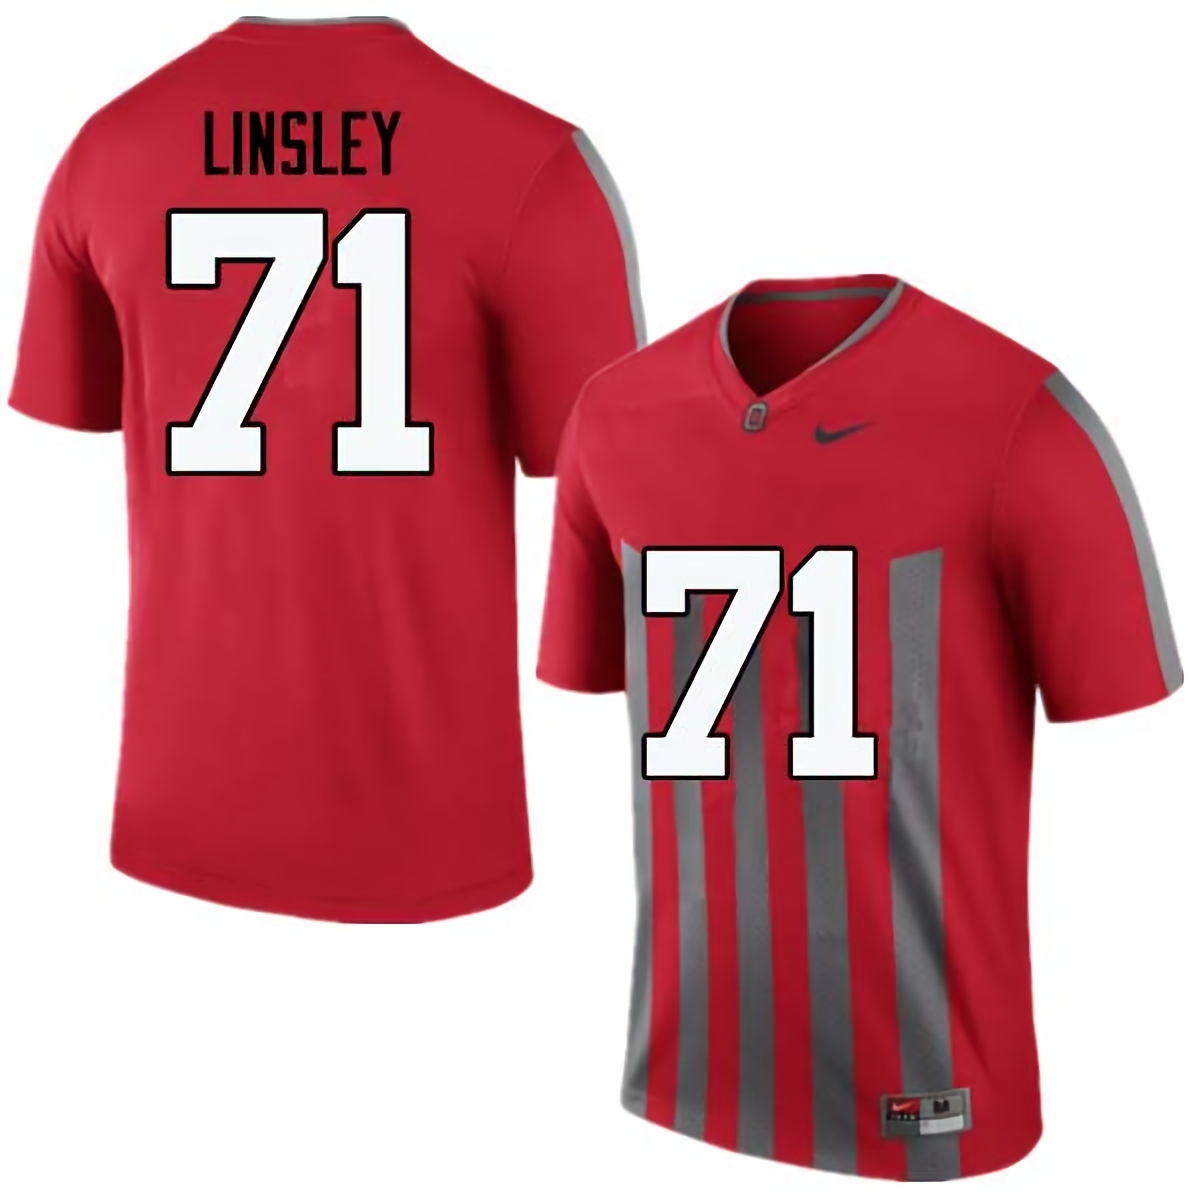 Corey Linsley Ohio State Buckeyes Men's NCAA #71 Nike Throwback Red College Stitched Football Jersey MDL5356IN